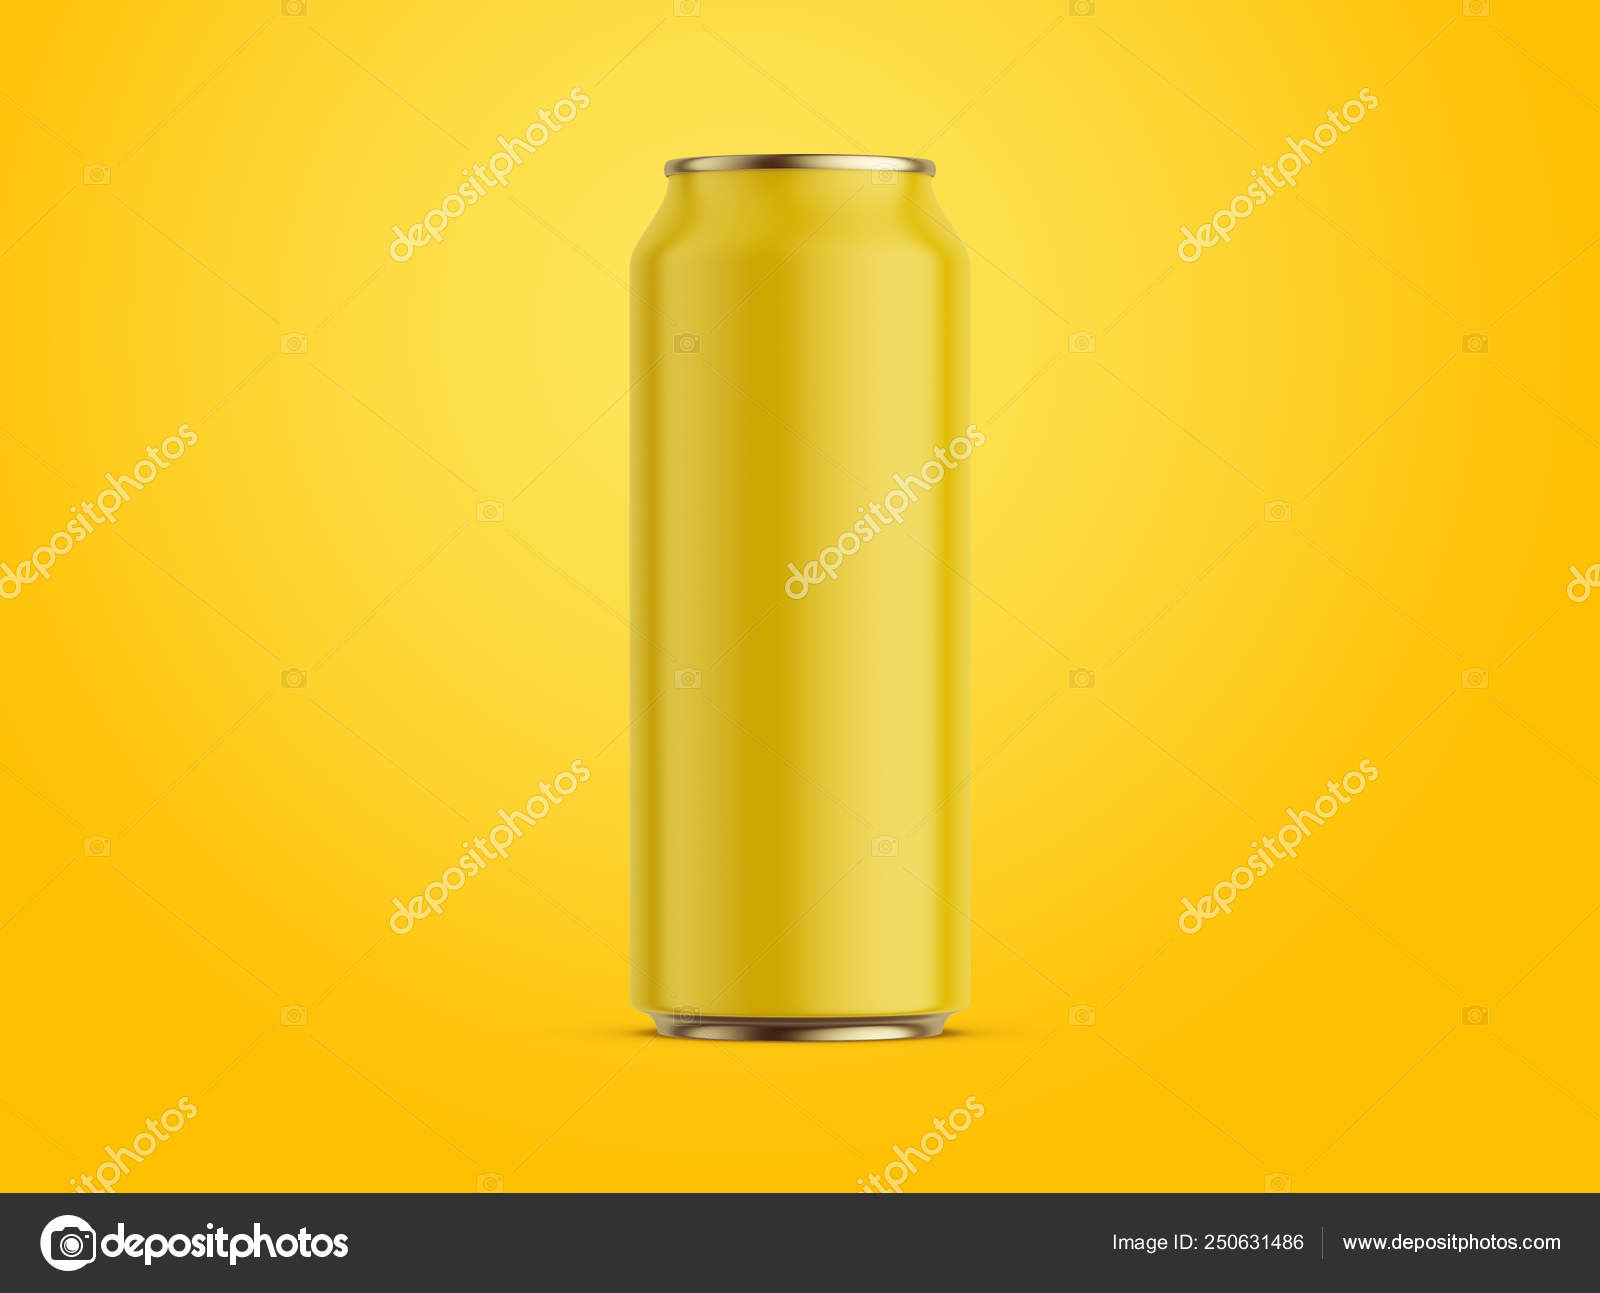 Download Aluminum Can Mockup Yellow Background 500 Aluminum Soda Can Mock Royalty Free Photo Stock Image By C Vanderon 250631486